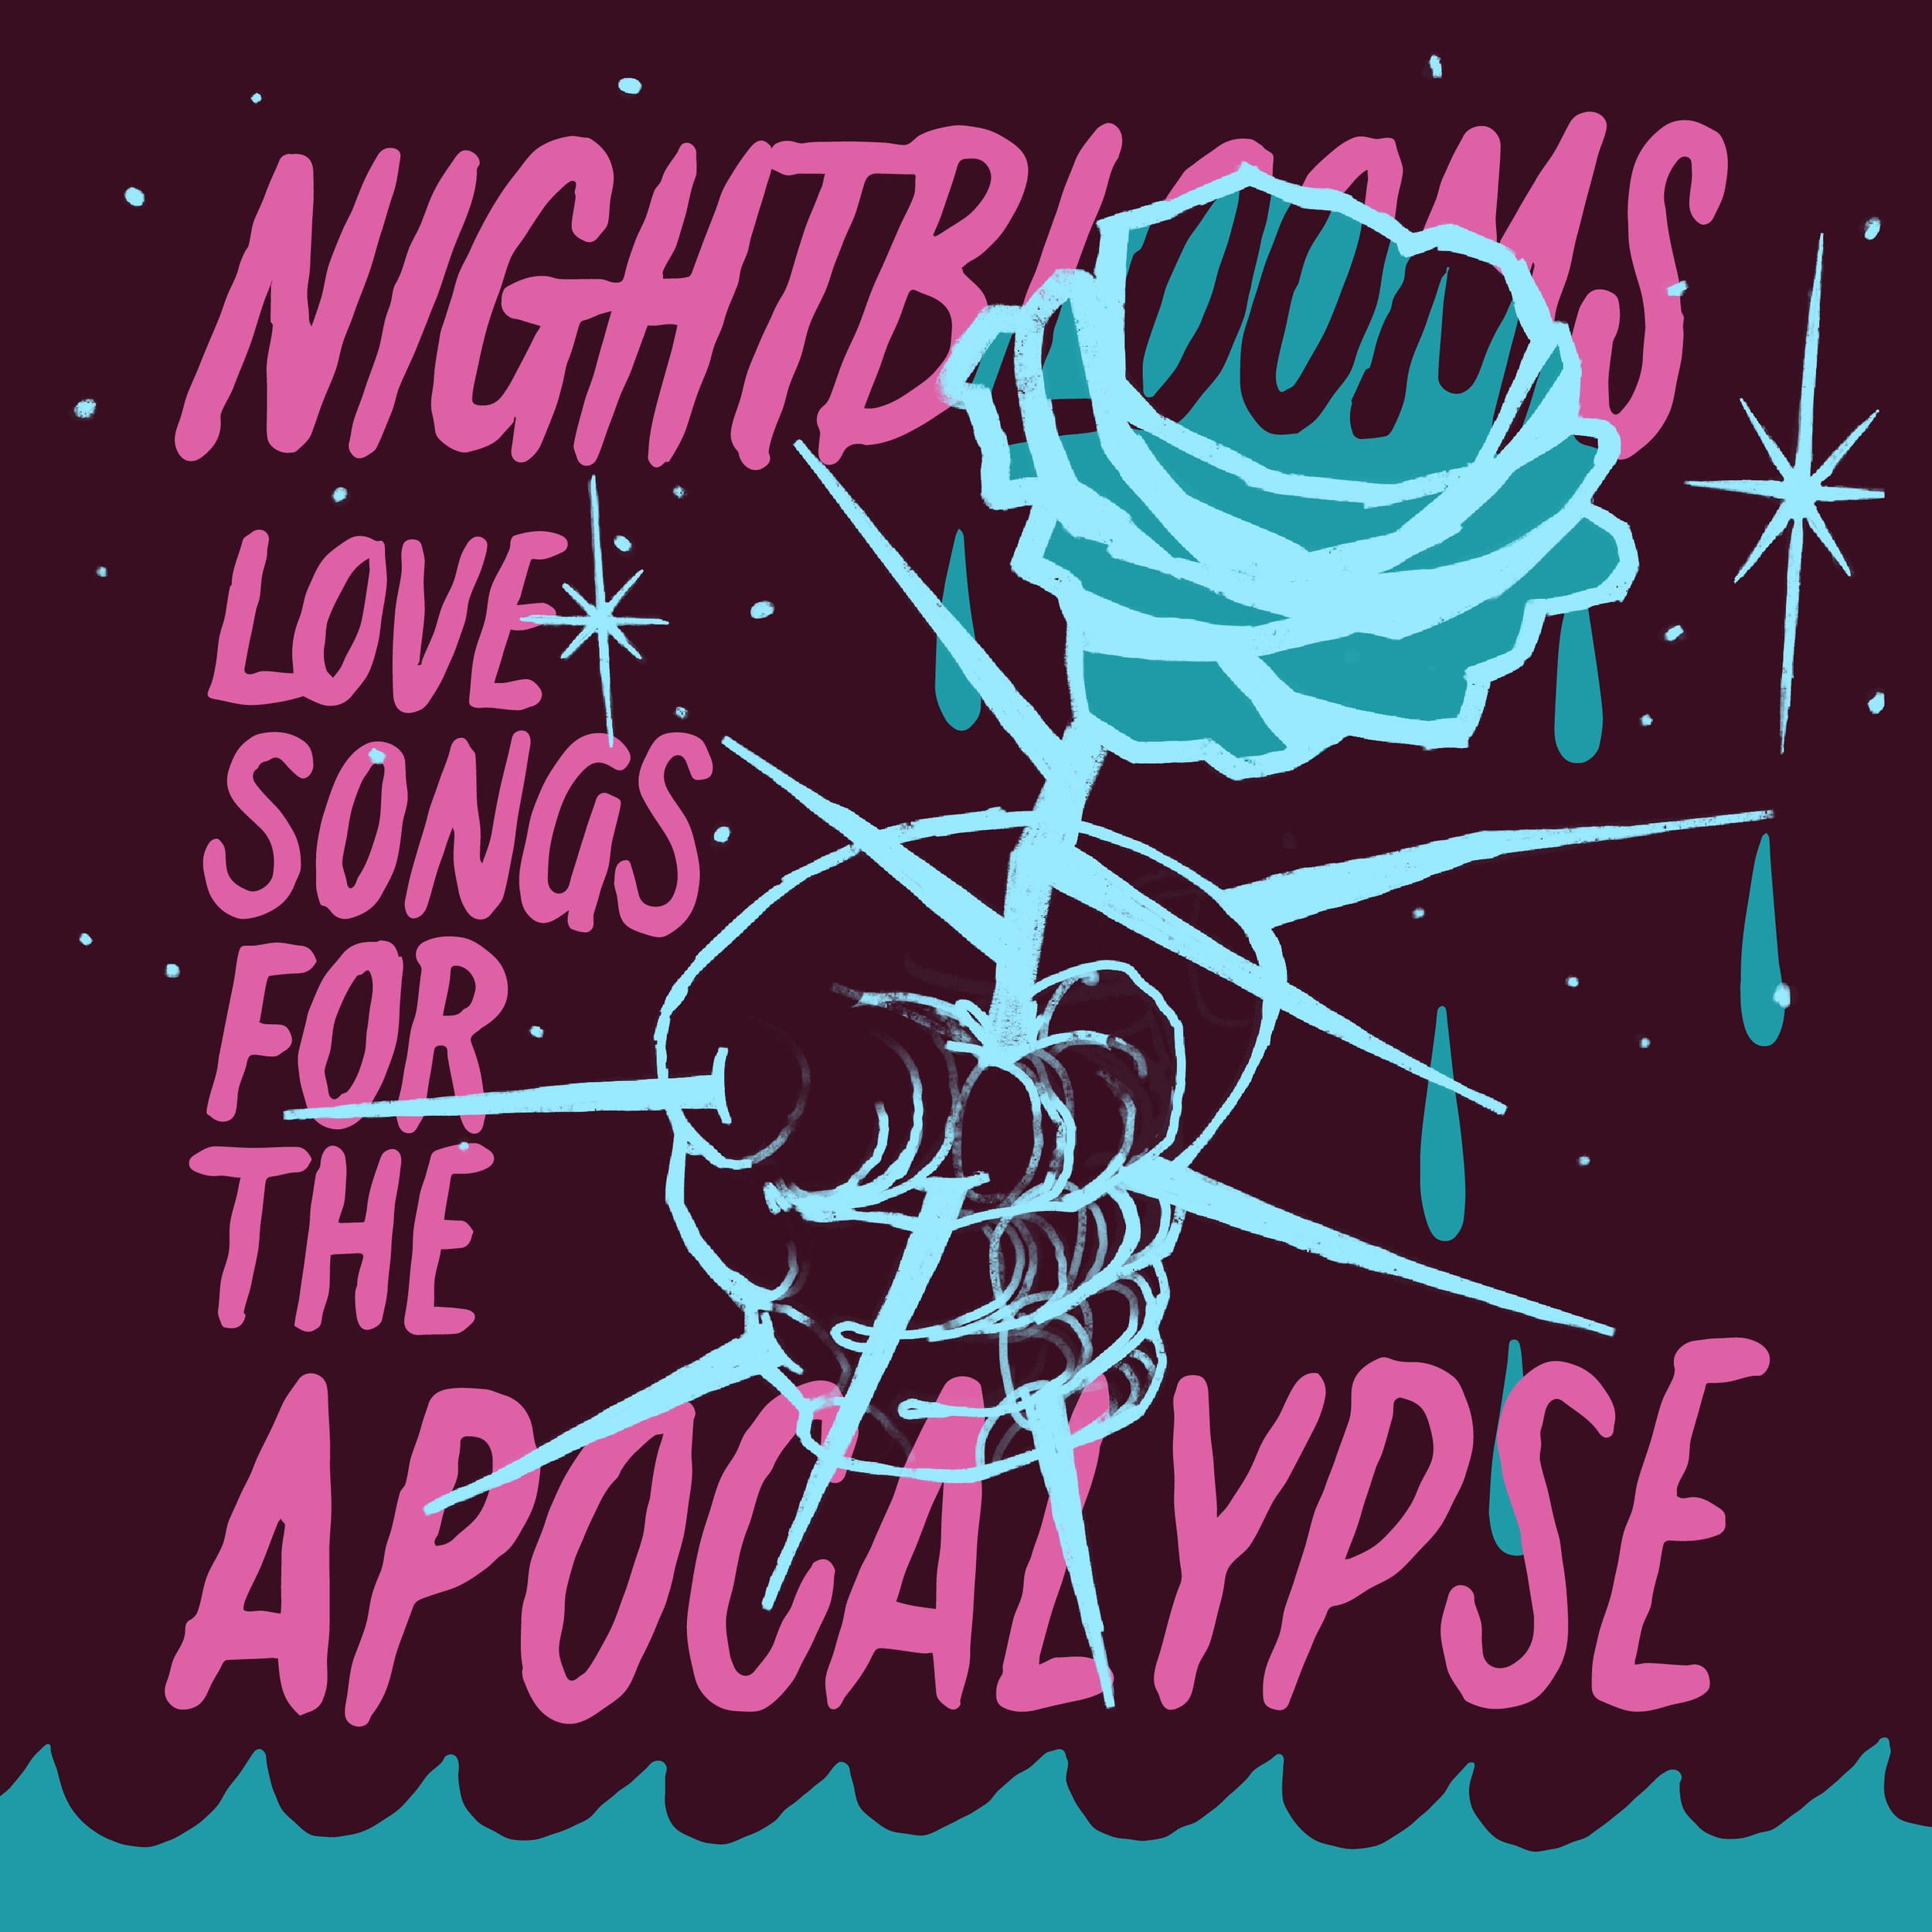 EP 2: Love Songs for the Apocalypse